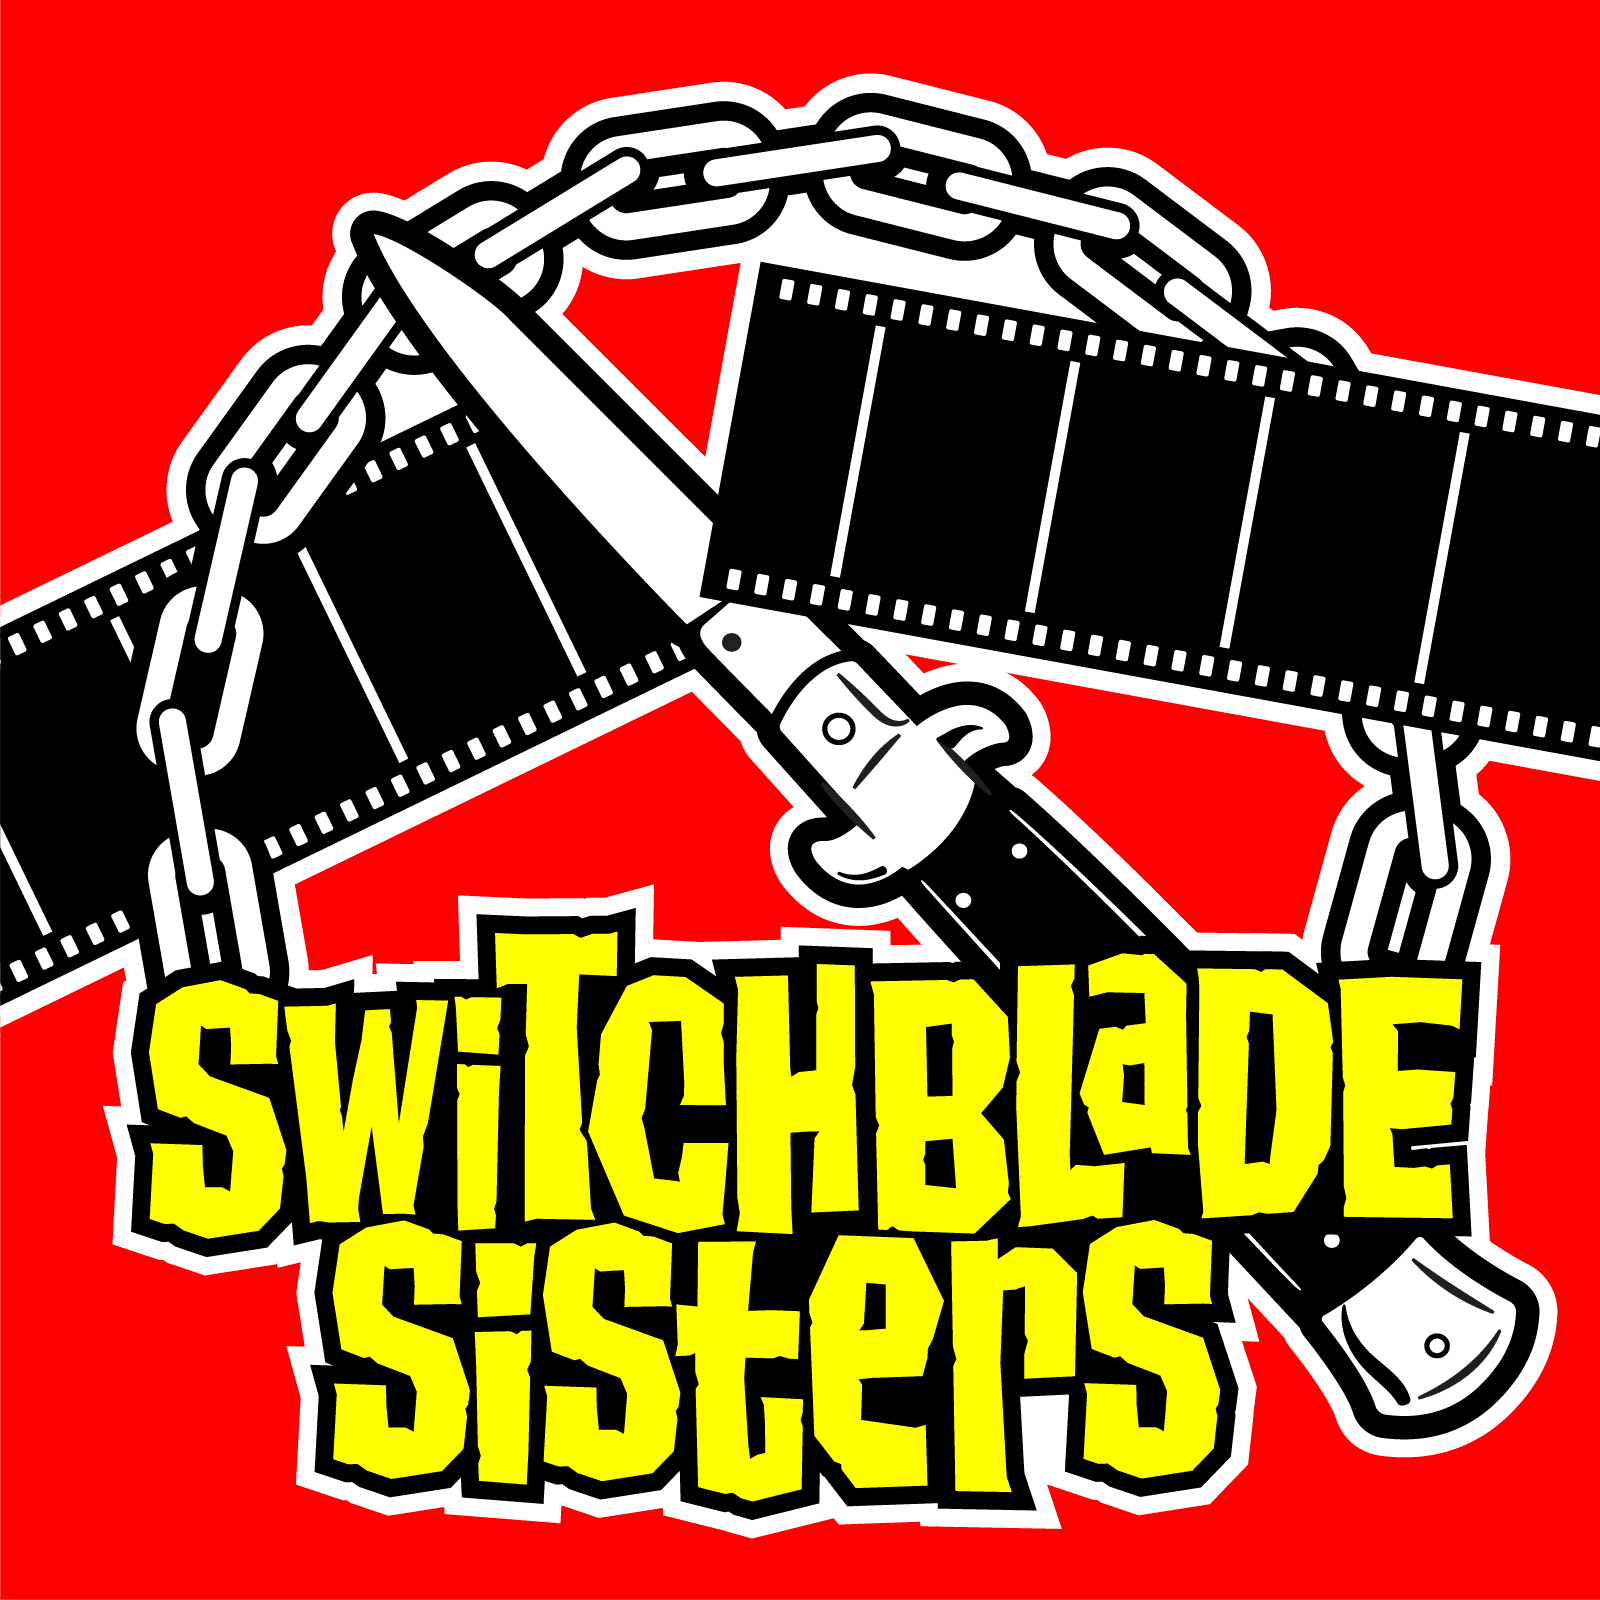 Switchblade Sisters Logo